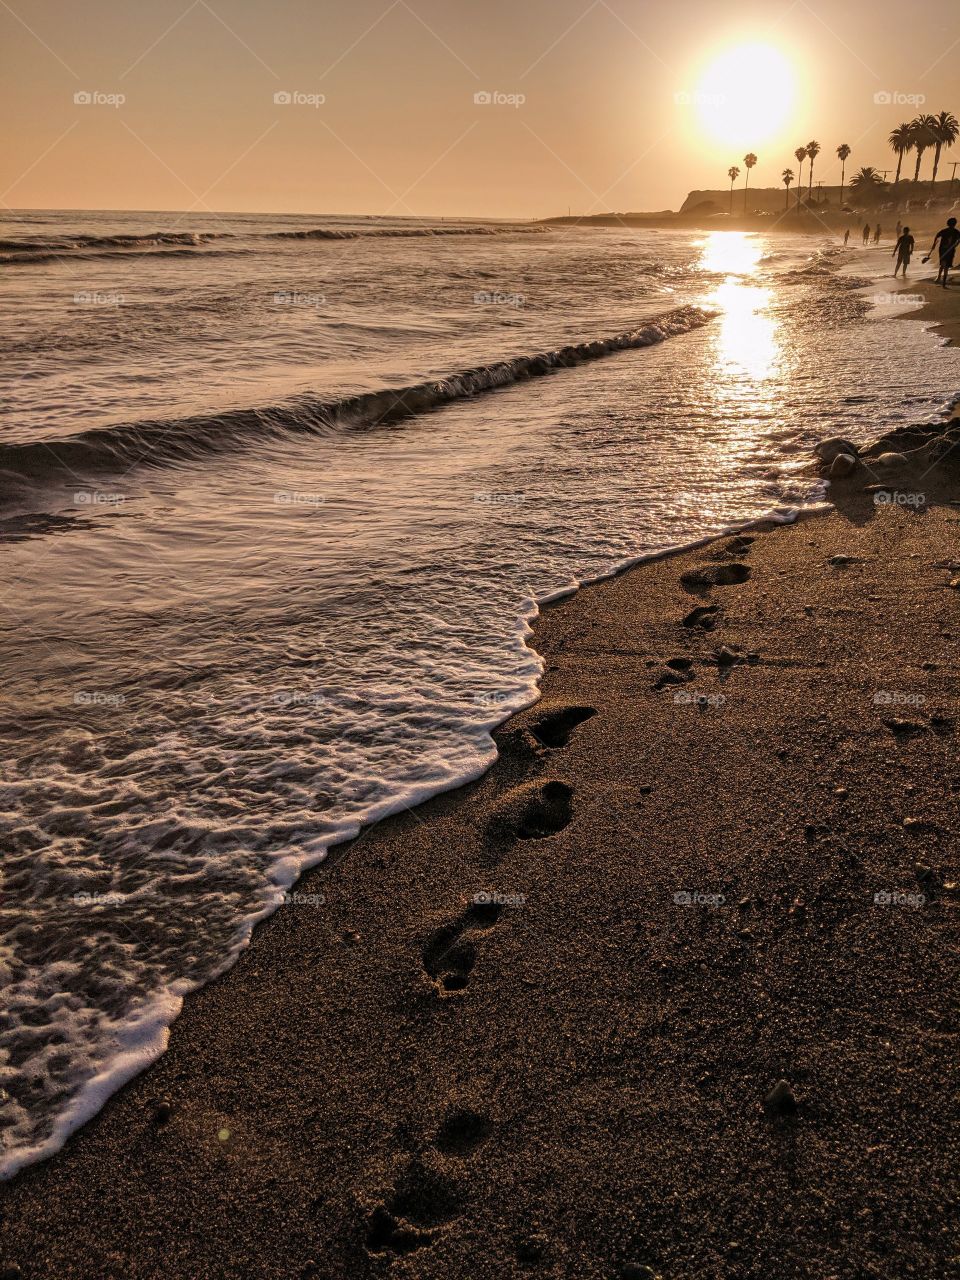 Sunset at San Onofre Beach California, Dramatic lighting with footprints in the shoreline.